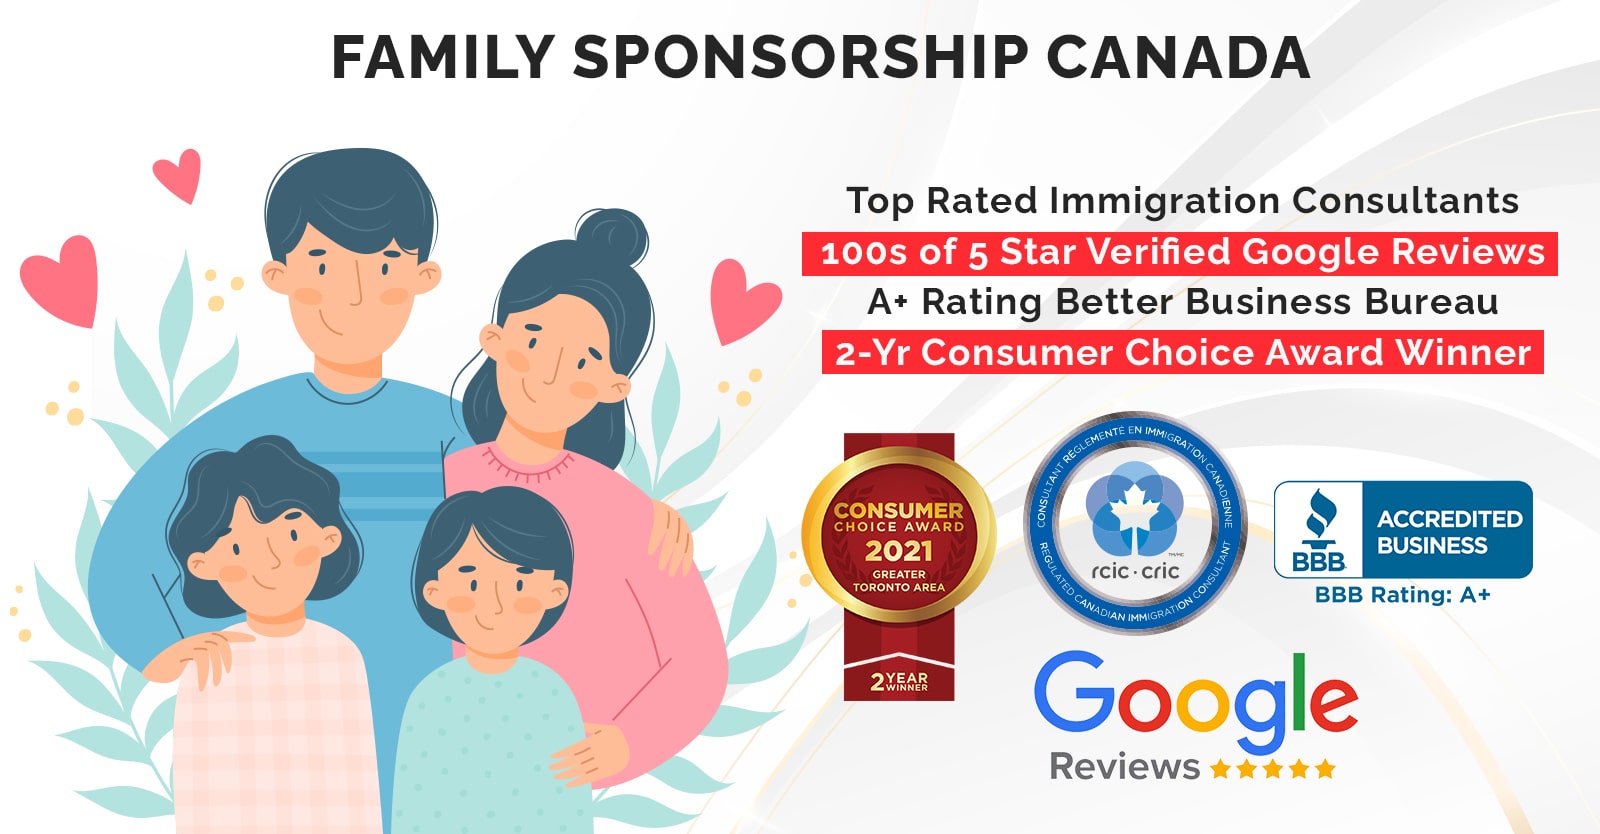 Family Sponsorship Canada - Canadian citizens and permanent residents have the opportunity to sponsor their spouse or common-law partner for Canadian permanent resident status.